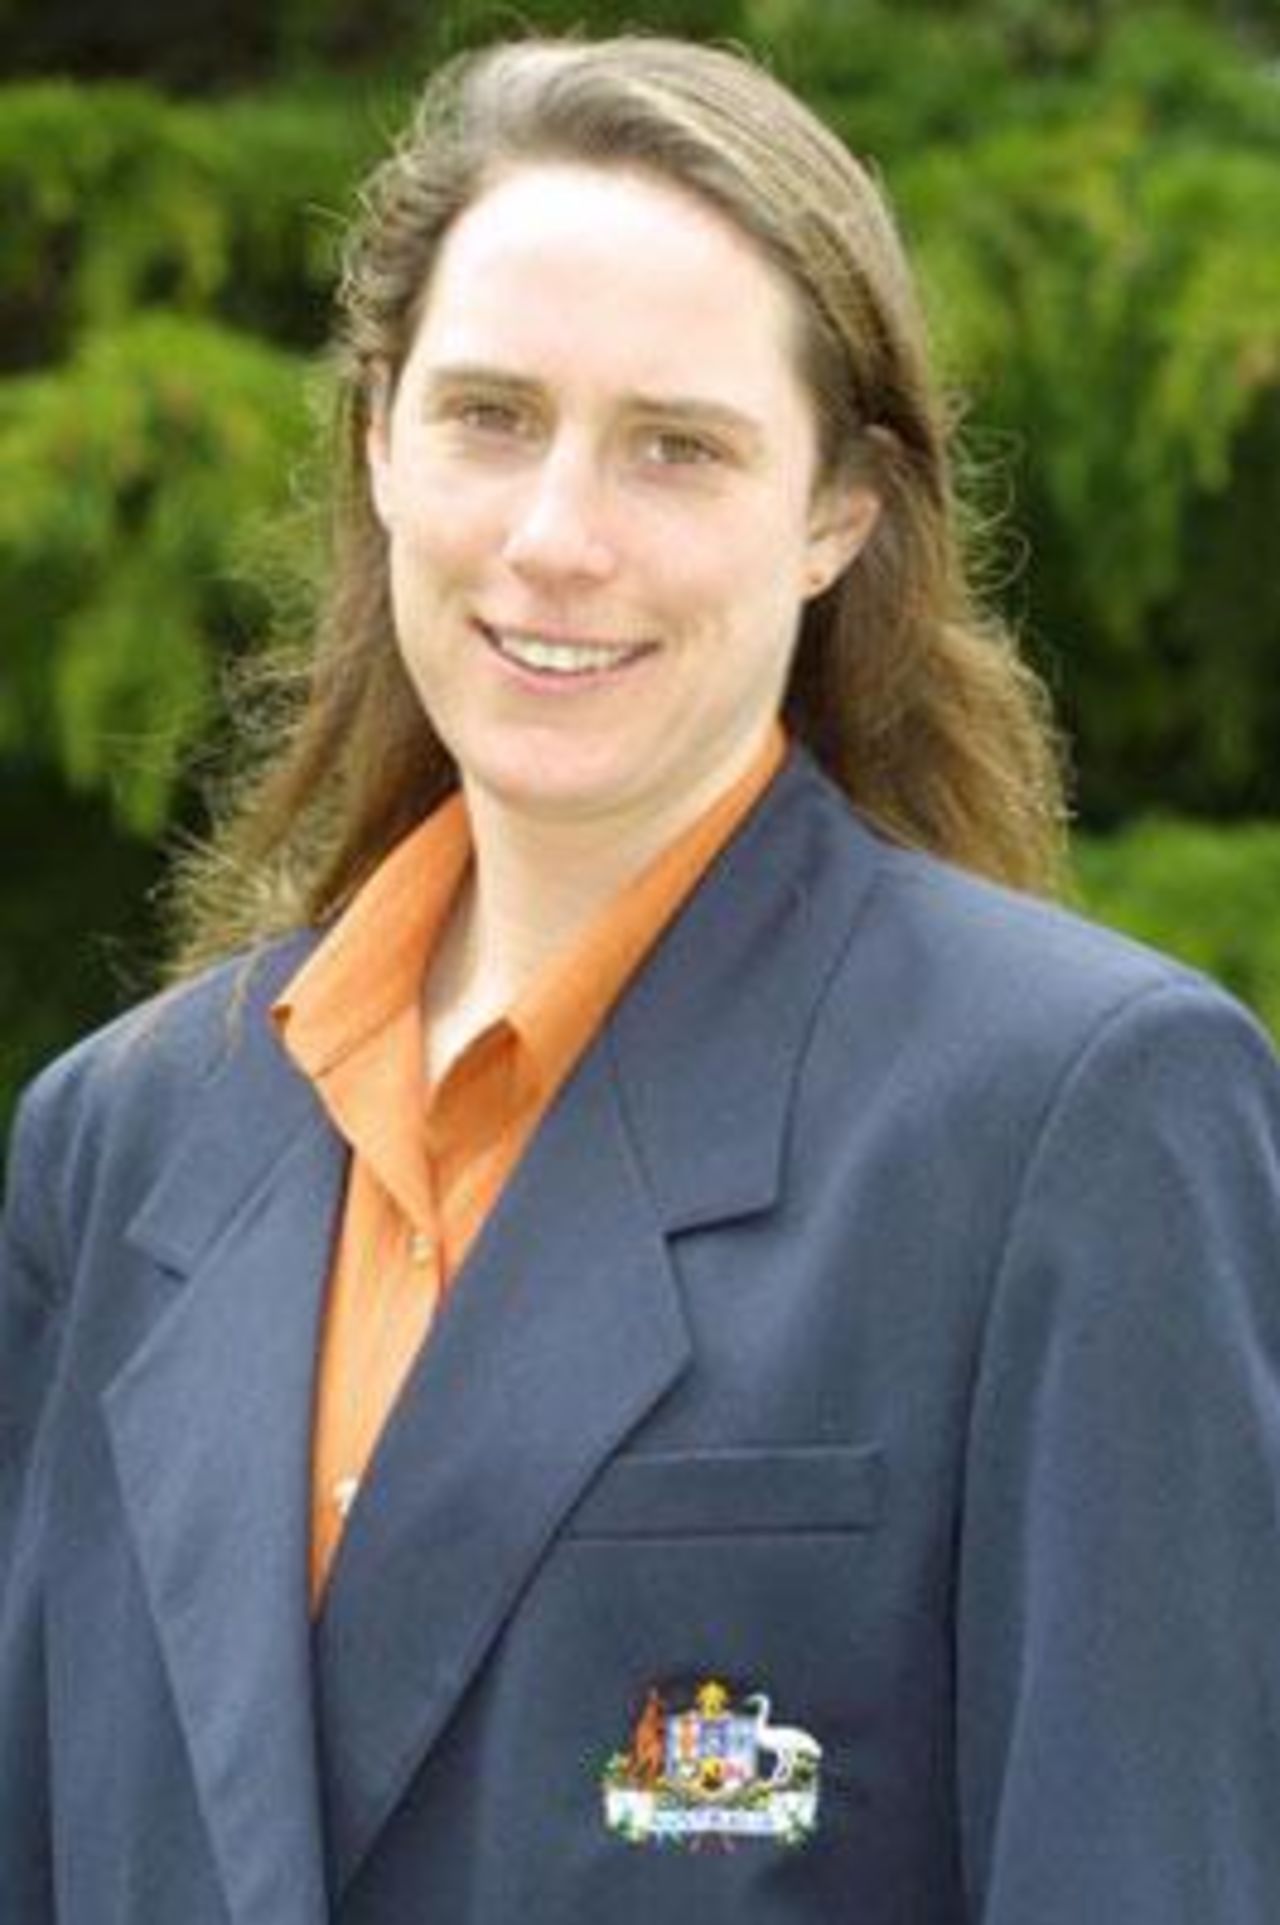 Portrait of Therese McGregor - Australia player in the CricInfo Women's World Cup 2000